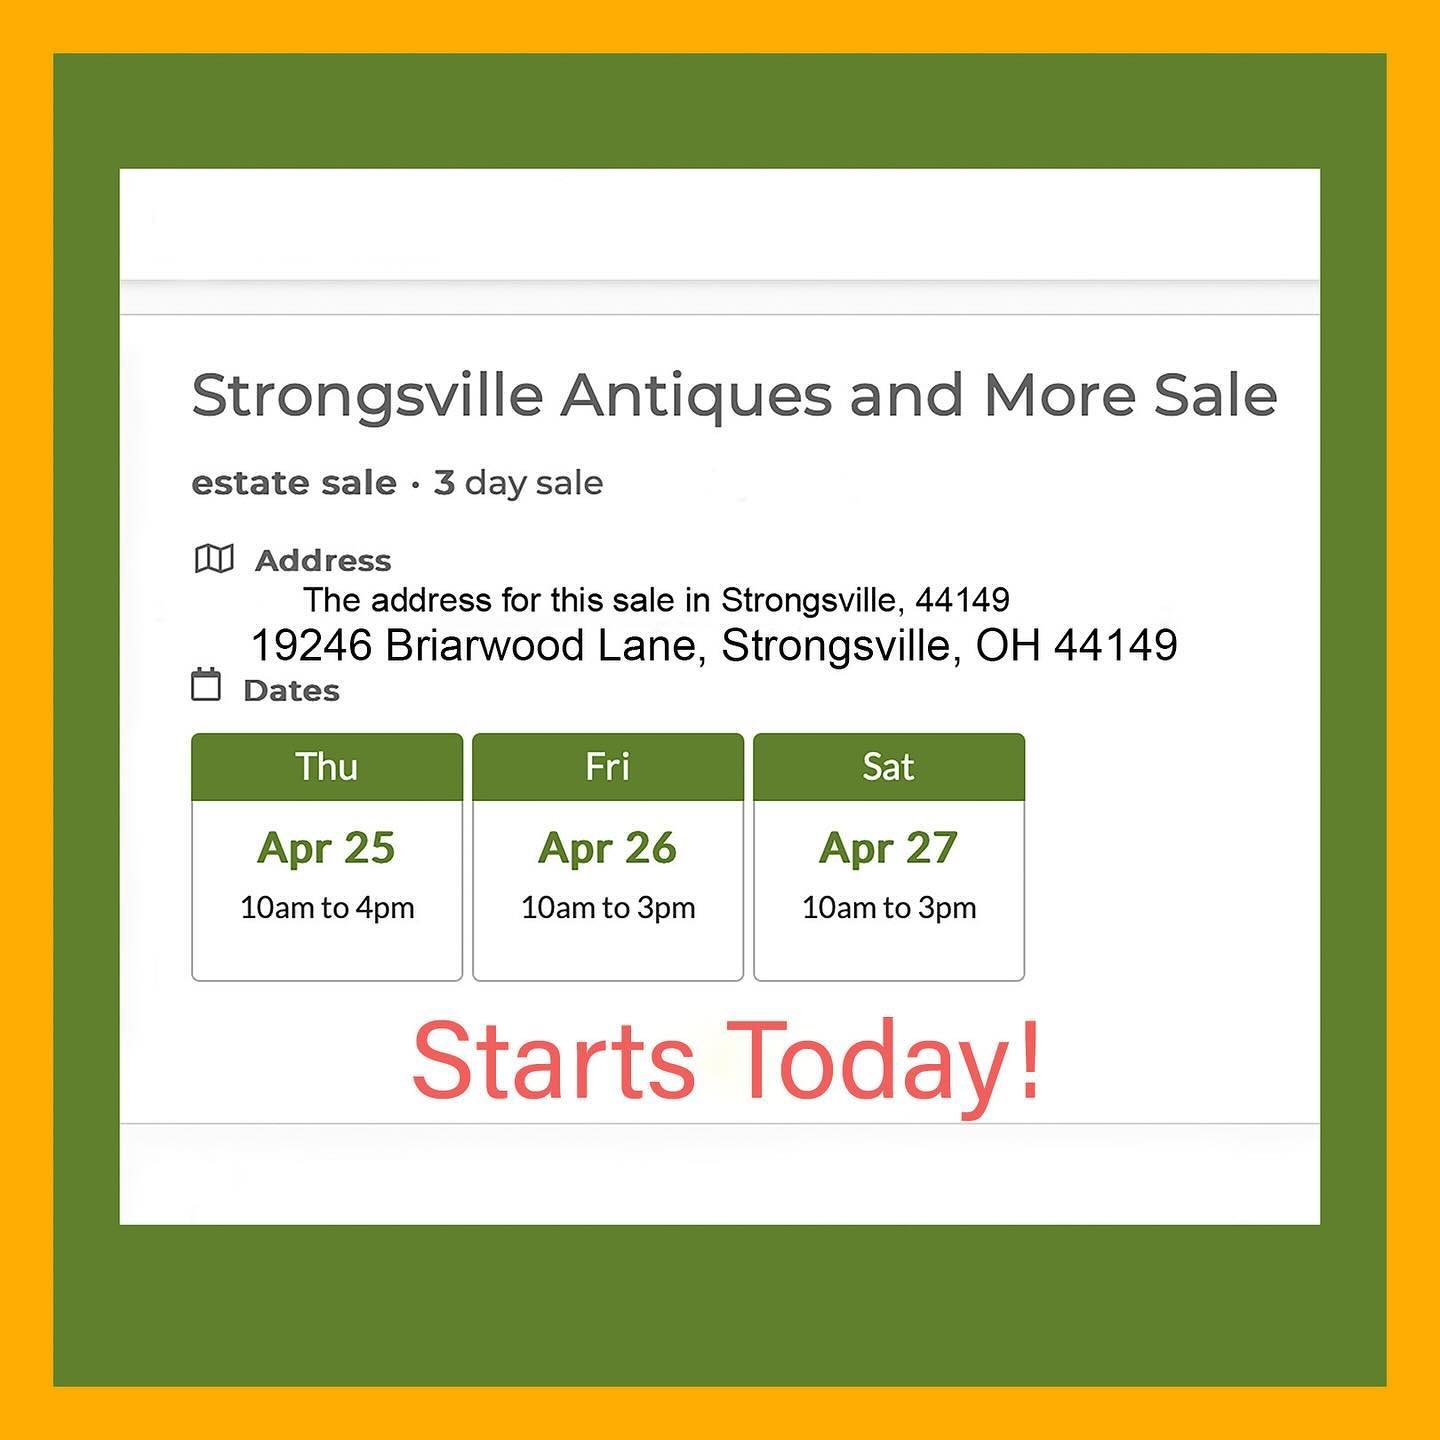 Starts TODAY Thursday 4/25/24. All Things For You&rsquo;s Strongsville estate sale runs 4/25-4/27/24 in Strongsville 44149. Visit this fun All Things For You estate sale for some wonderful treasures. 
Check out the web address below for more details 